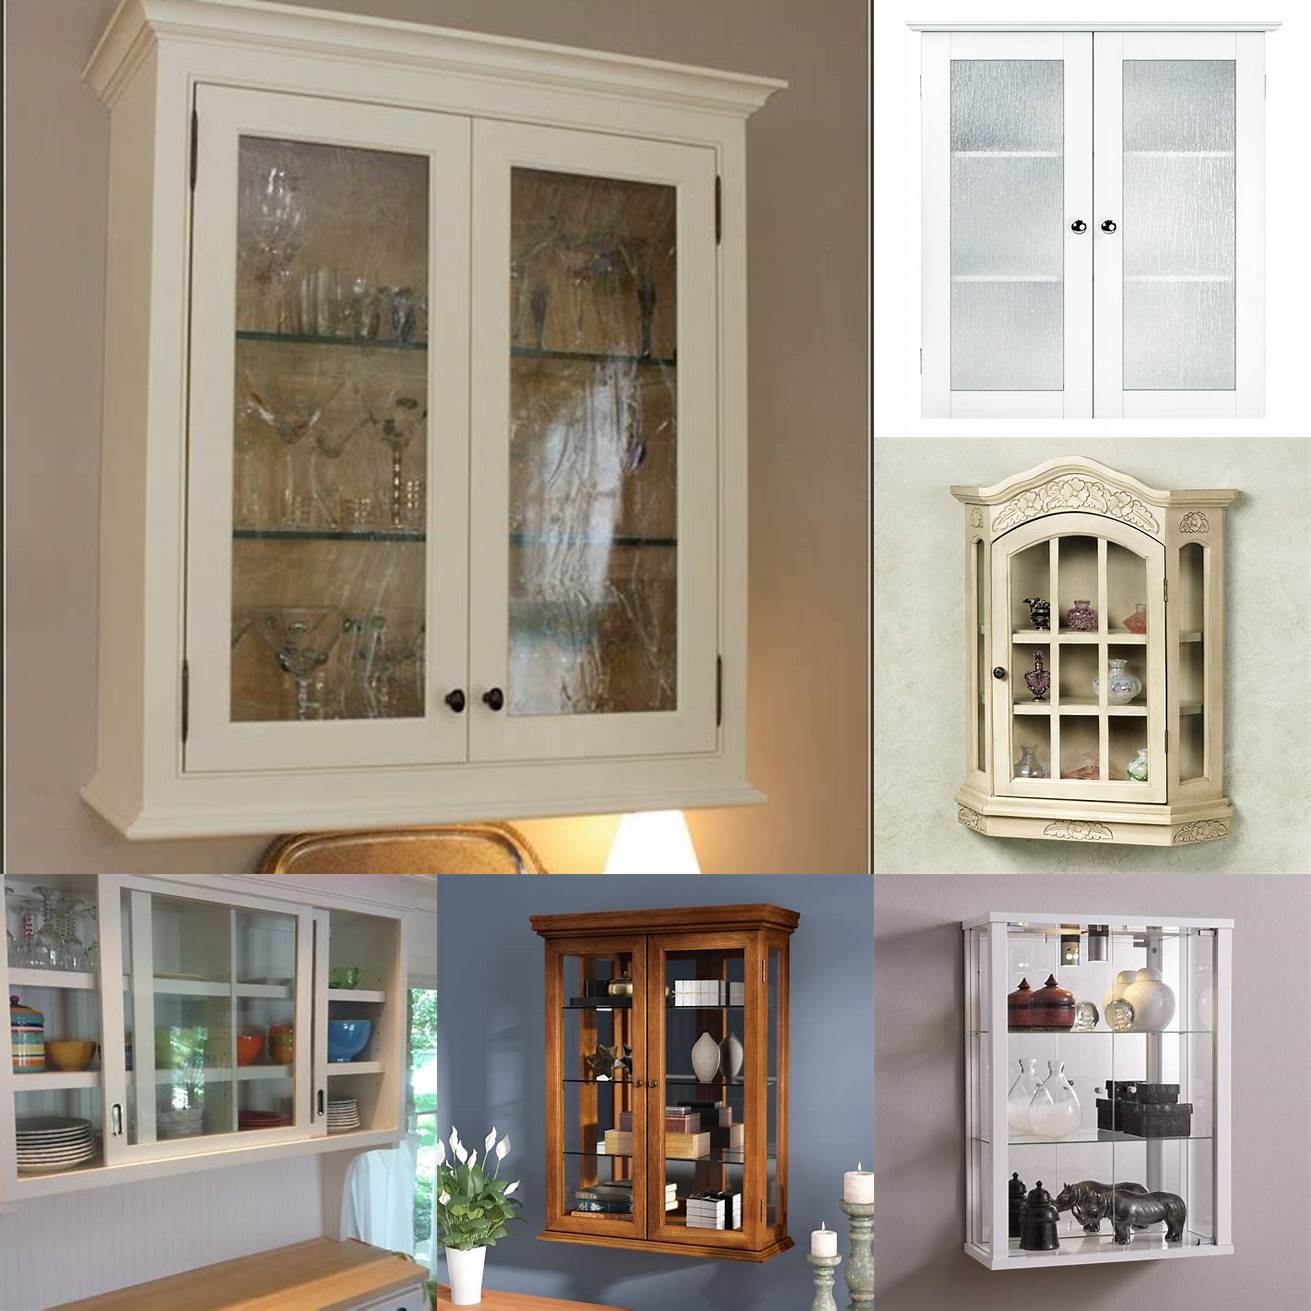 Image of a wall cabinet with glass doors